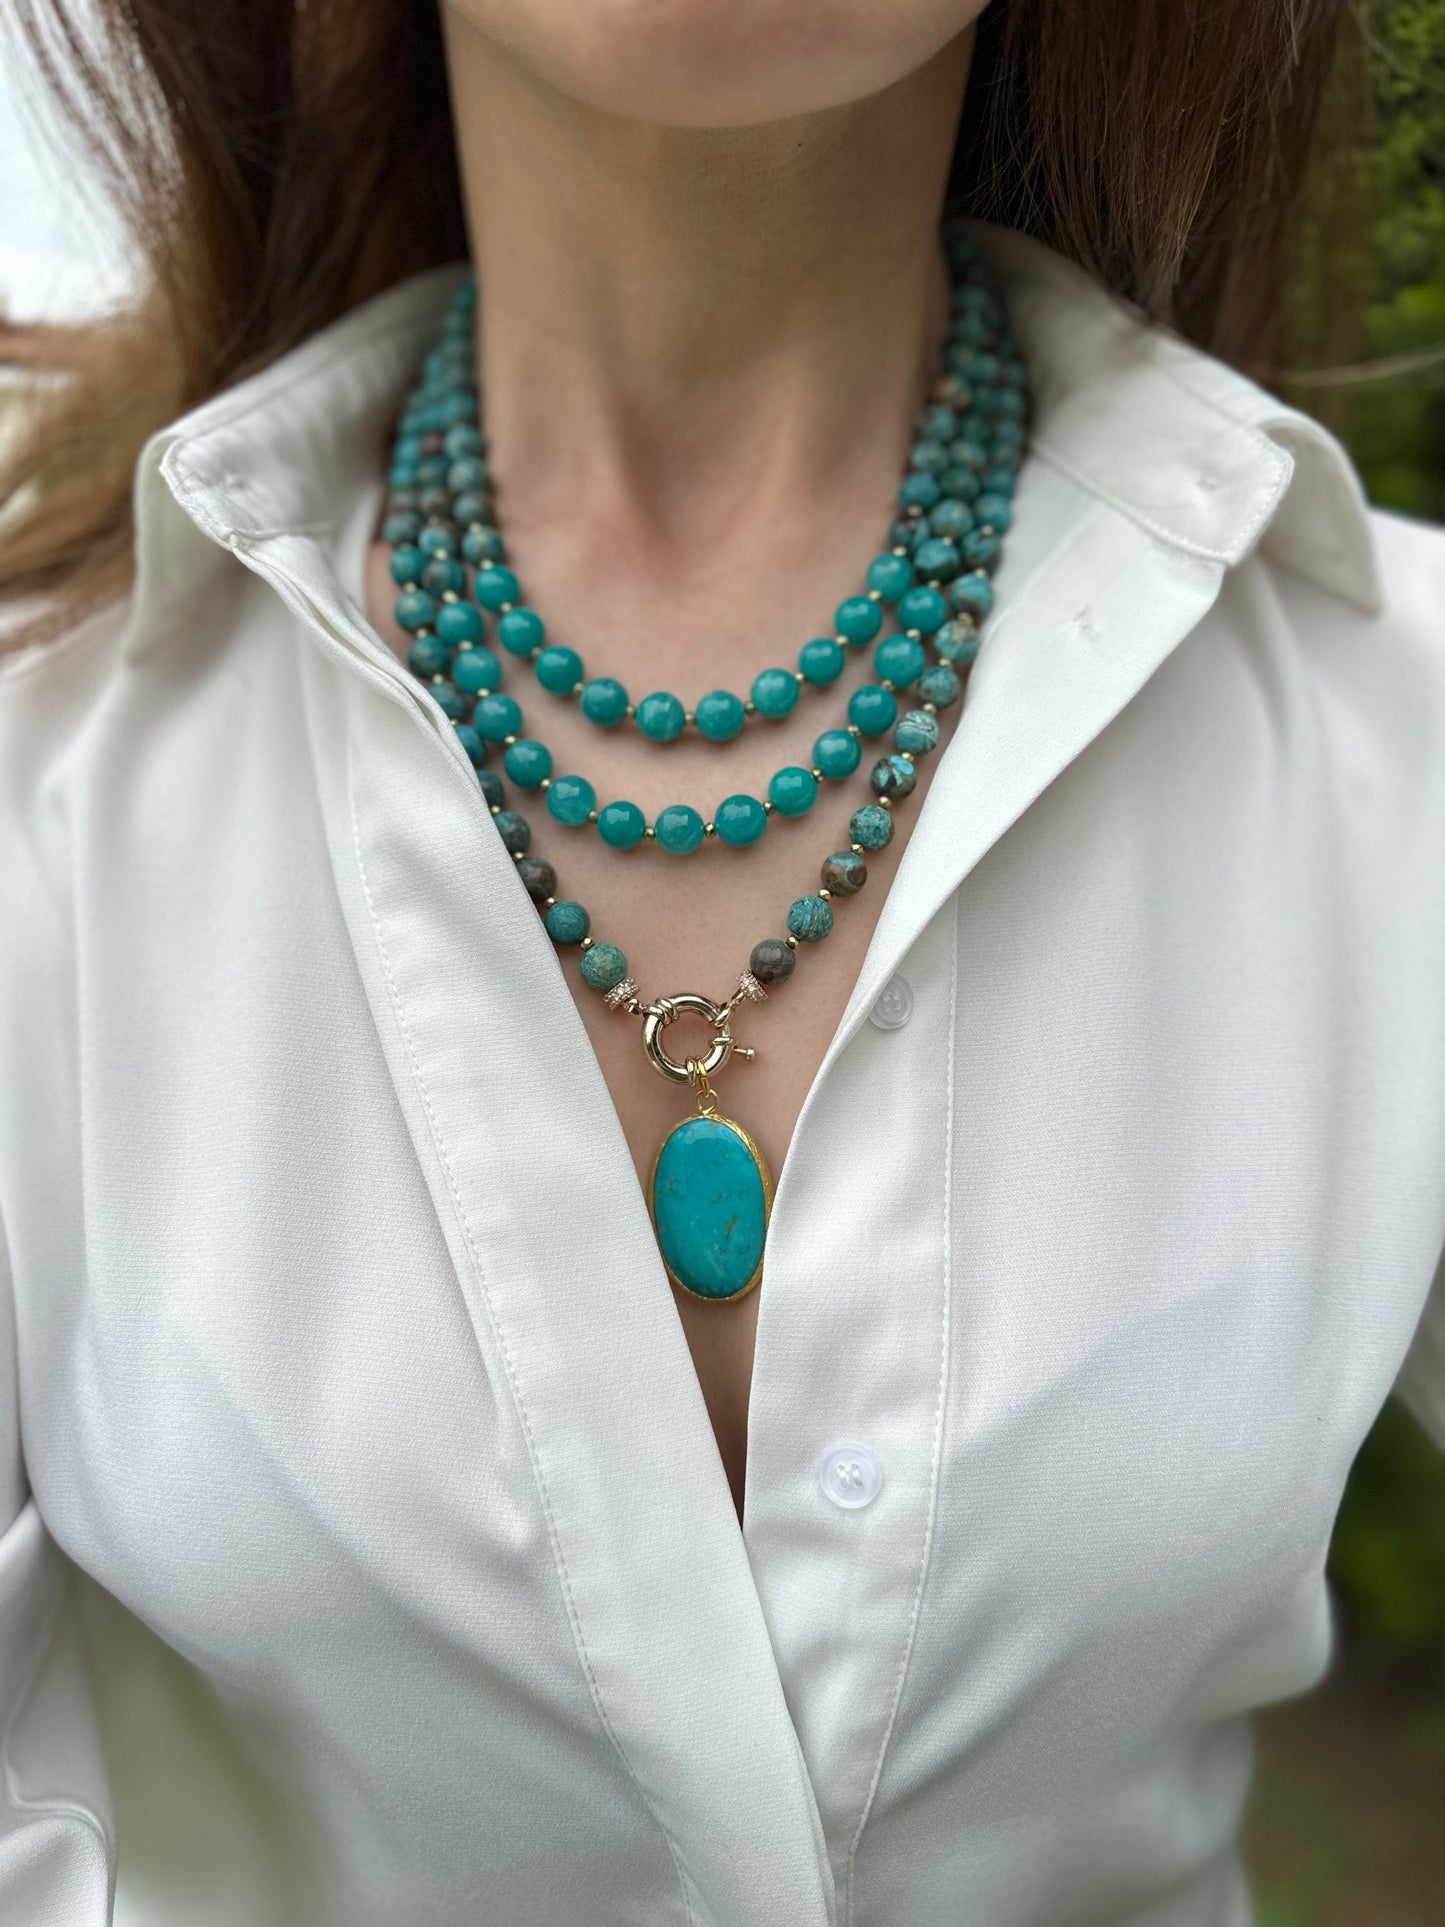 Amazonite and Jasper Necklace, Multistrand Blue Green Gemstones, Handmade Layered Jewelry for Mothers Day Gift, Big Bold Statement Necklace